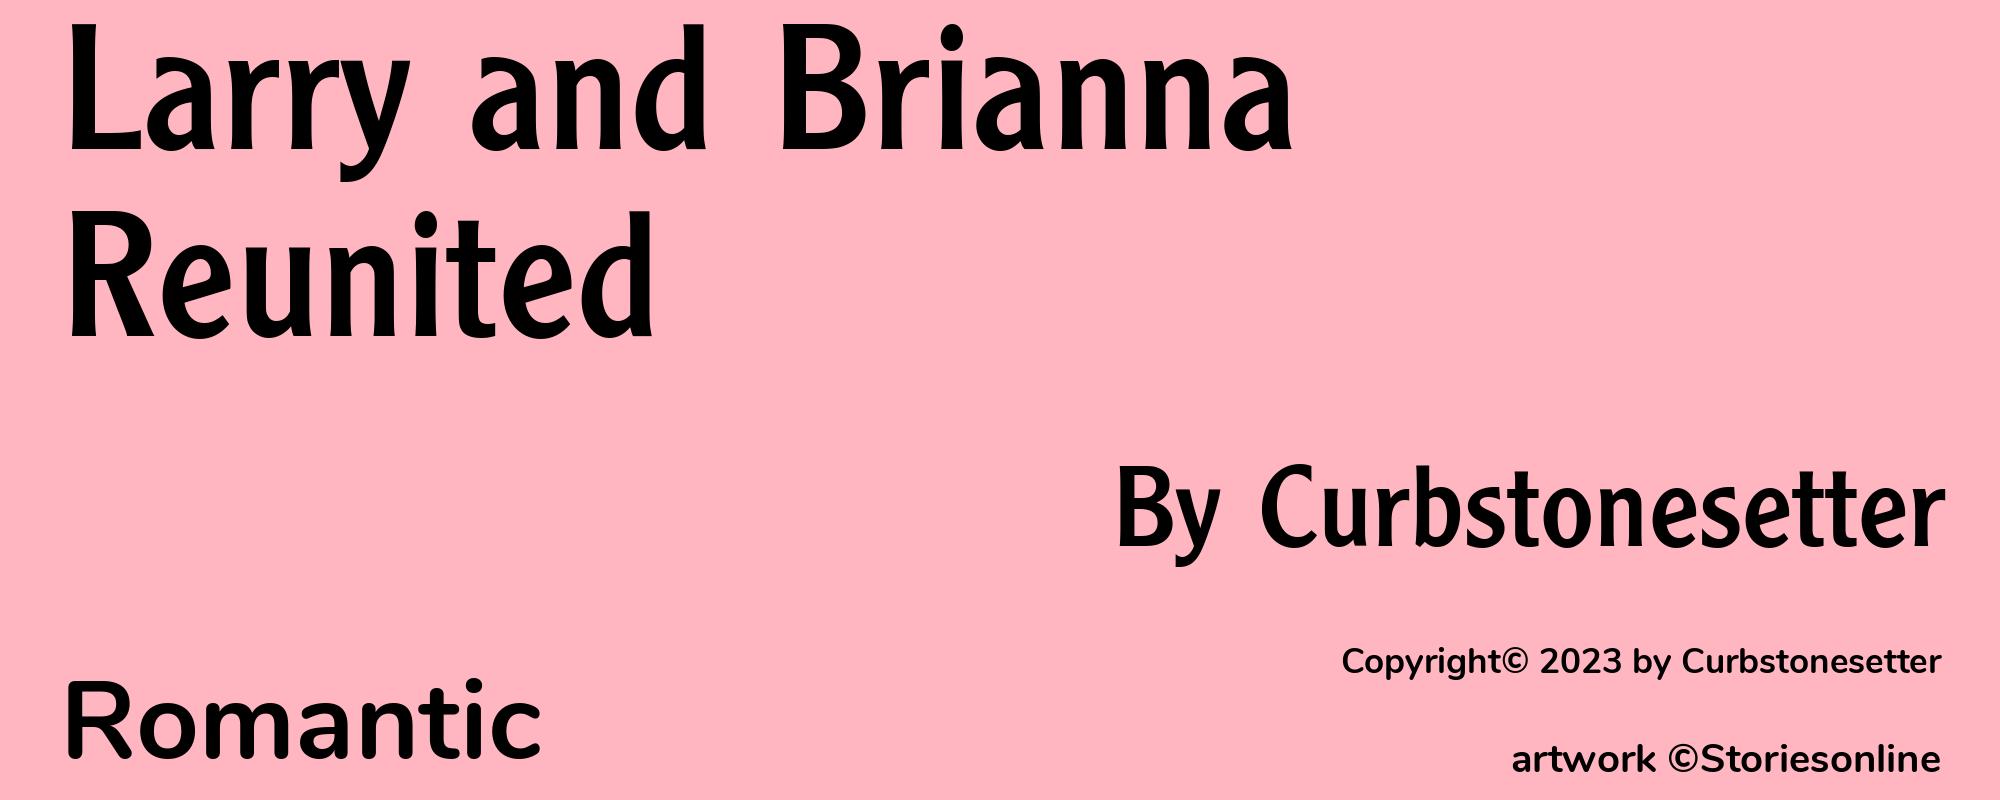 Larry and Brianna Reunited - Cover